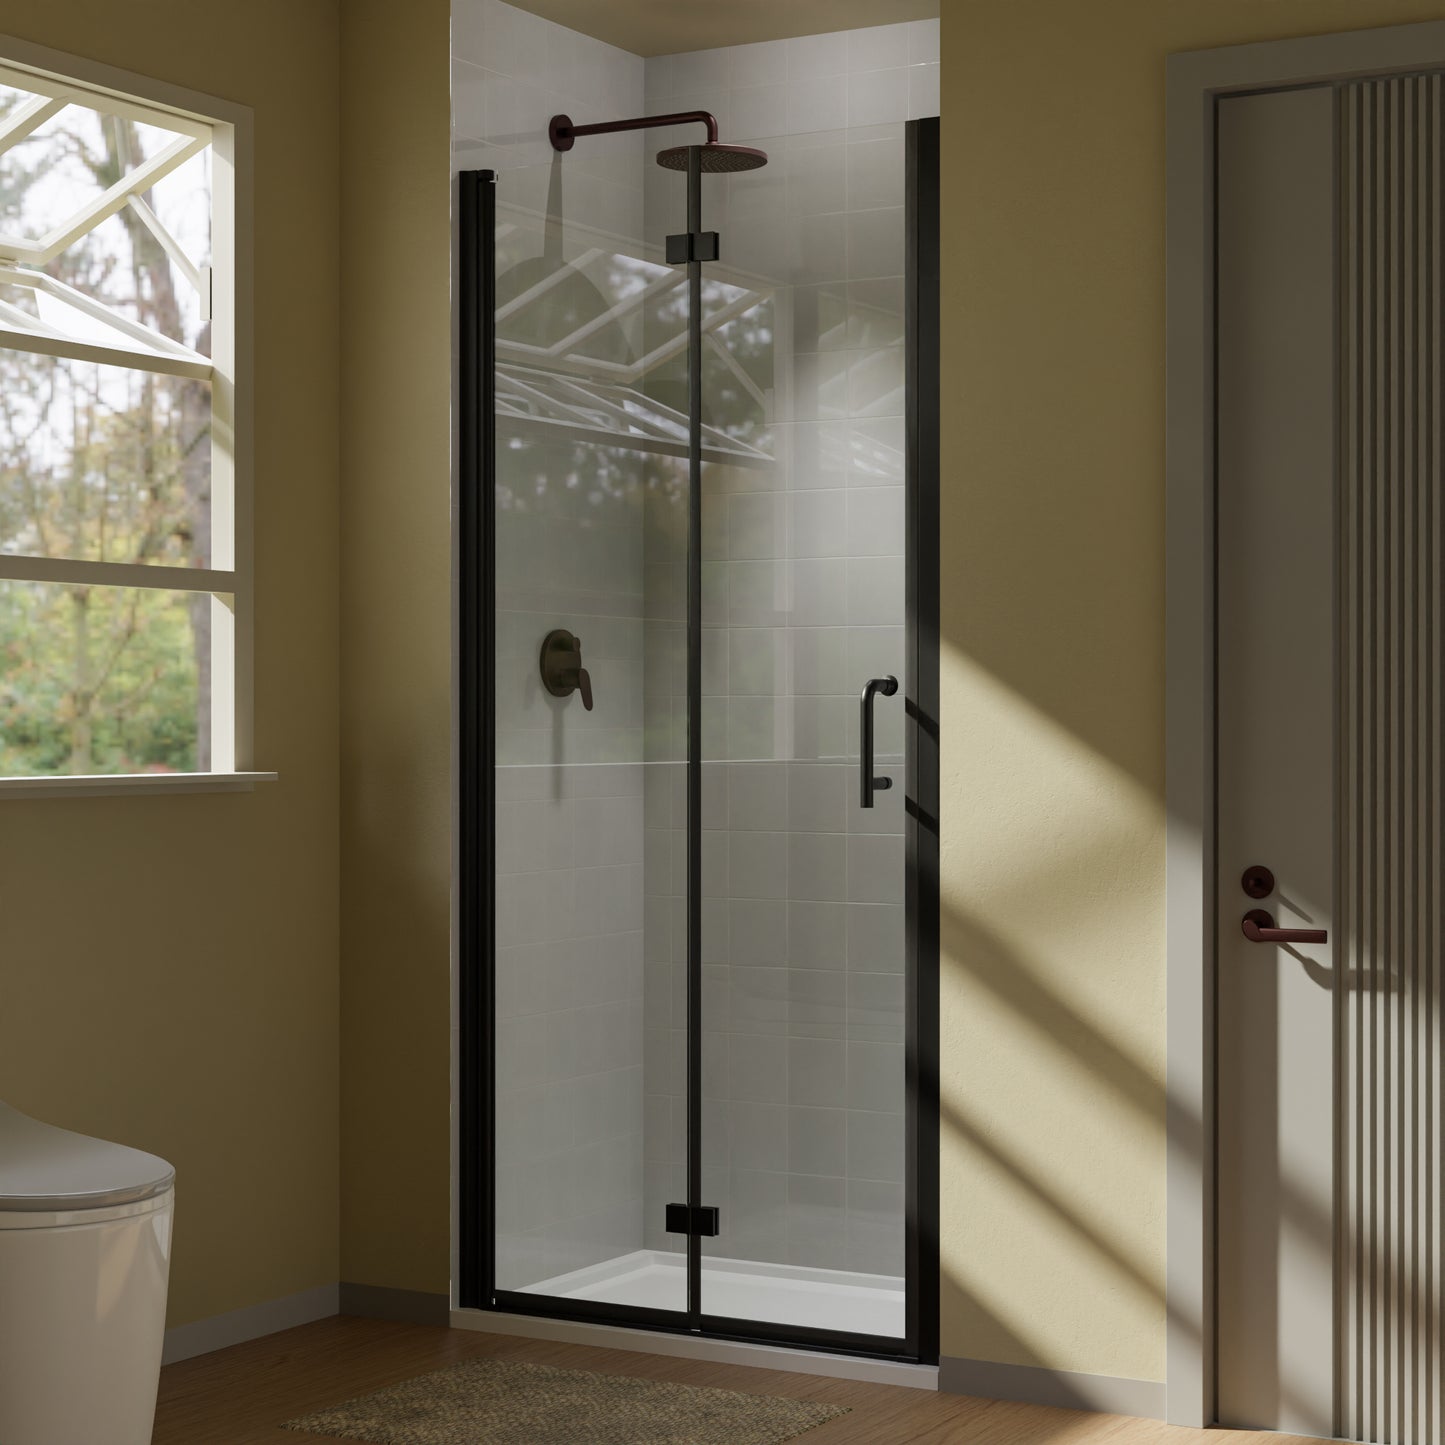 34" x 72" Pivot Glass Shower Door with Tempered Glass Swing Bathroom Shower Doors with Stainless Handle Frameless Hinged Shower Panel Matte Black